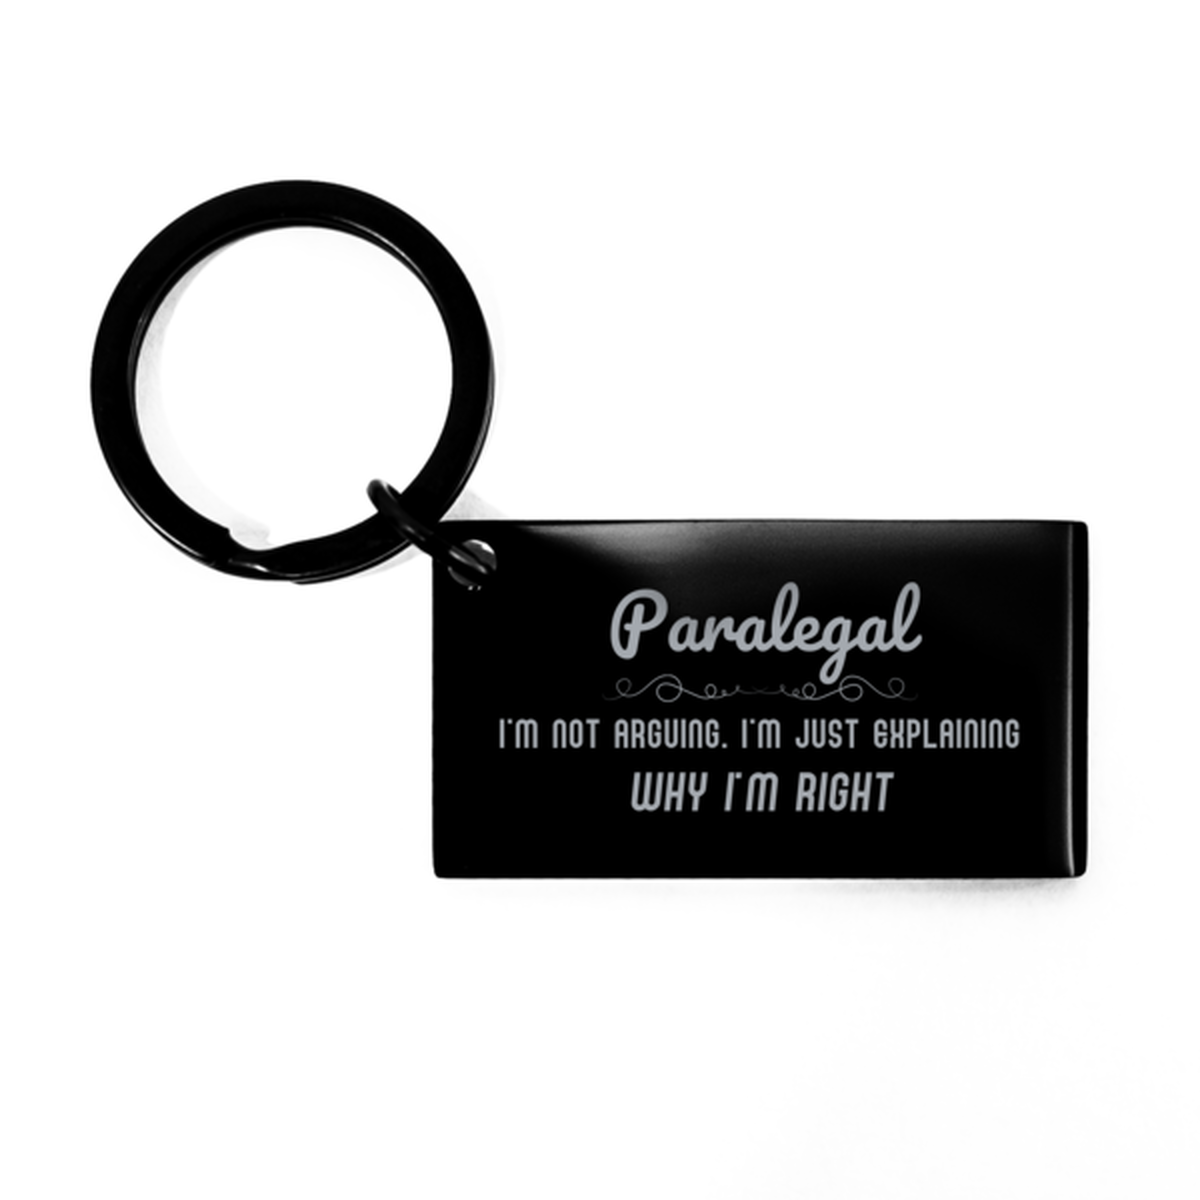 Paralegal I'm not Arguing. I'm Just Explaining Why I'm RIGHT Keychain, Funny Saying Quote Paralegal Gifts For Paralegal Graduation Birthday Christmas Gifts for Men Women Coworker